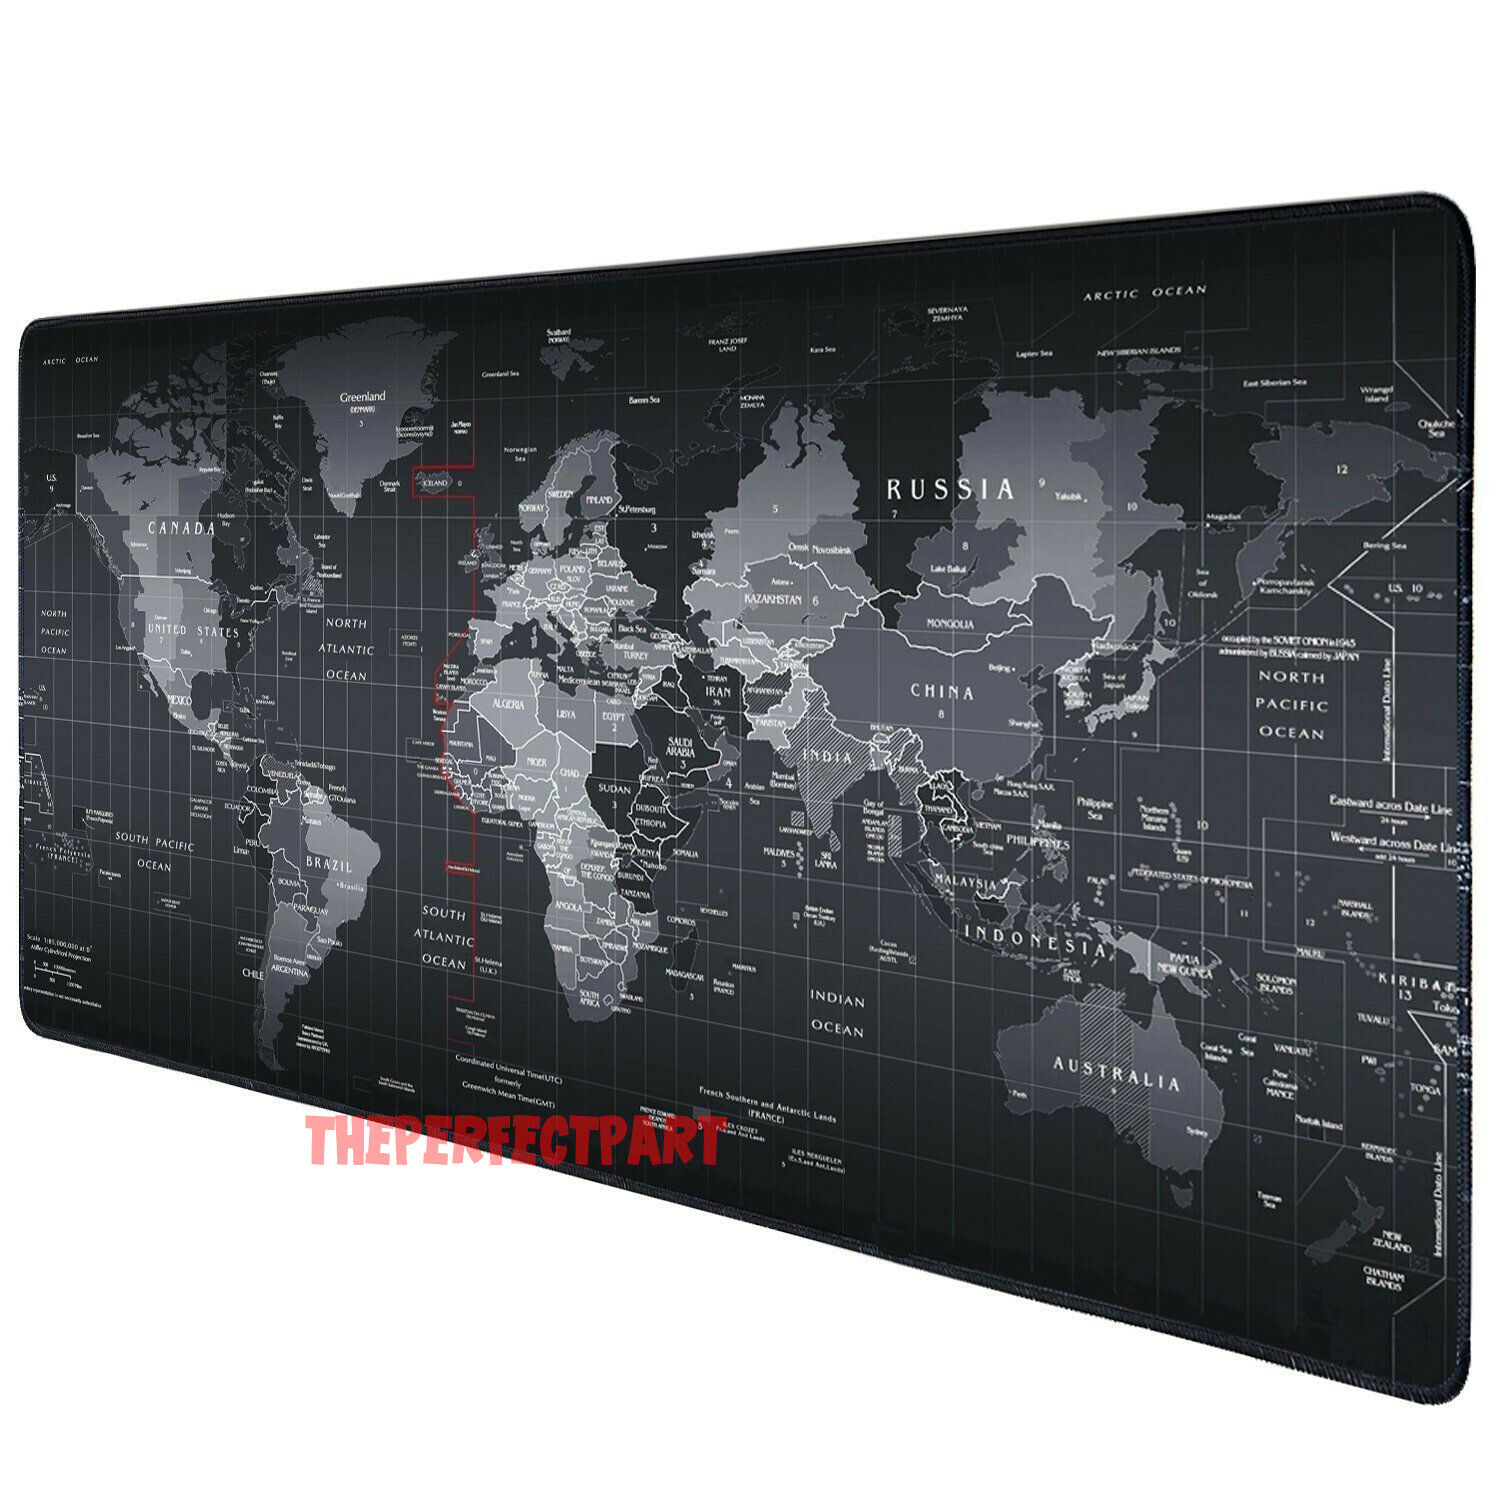 New Extended Gaming Mouse Pad Large Size Desk Keyboard Mat 800mm X 300mm